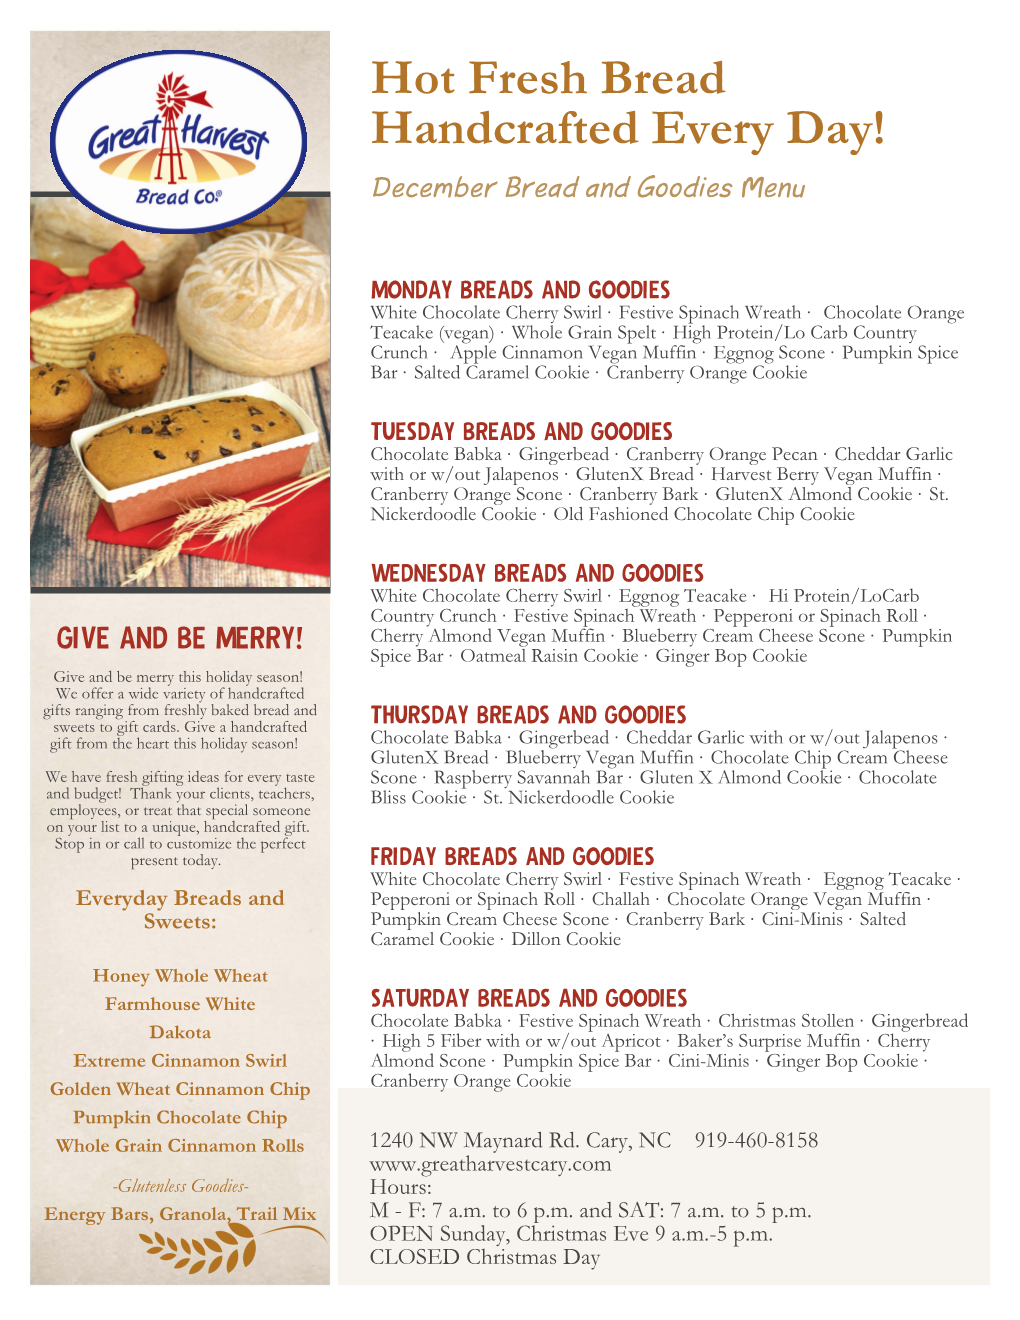 Hot Fresh Bread Handcrafted Every Day! December Bread and Goodies Menu